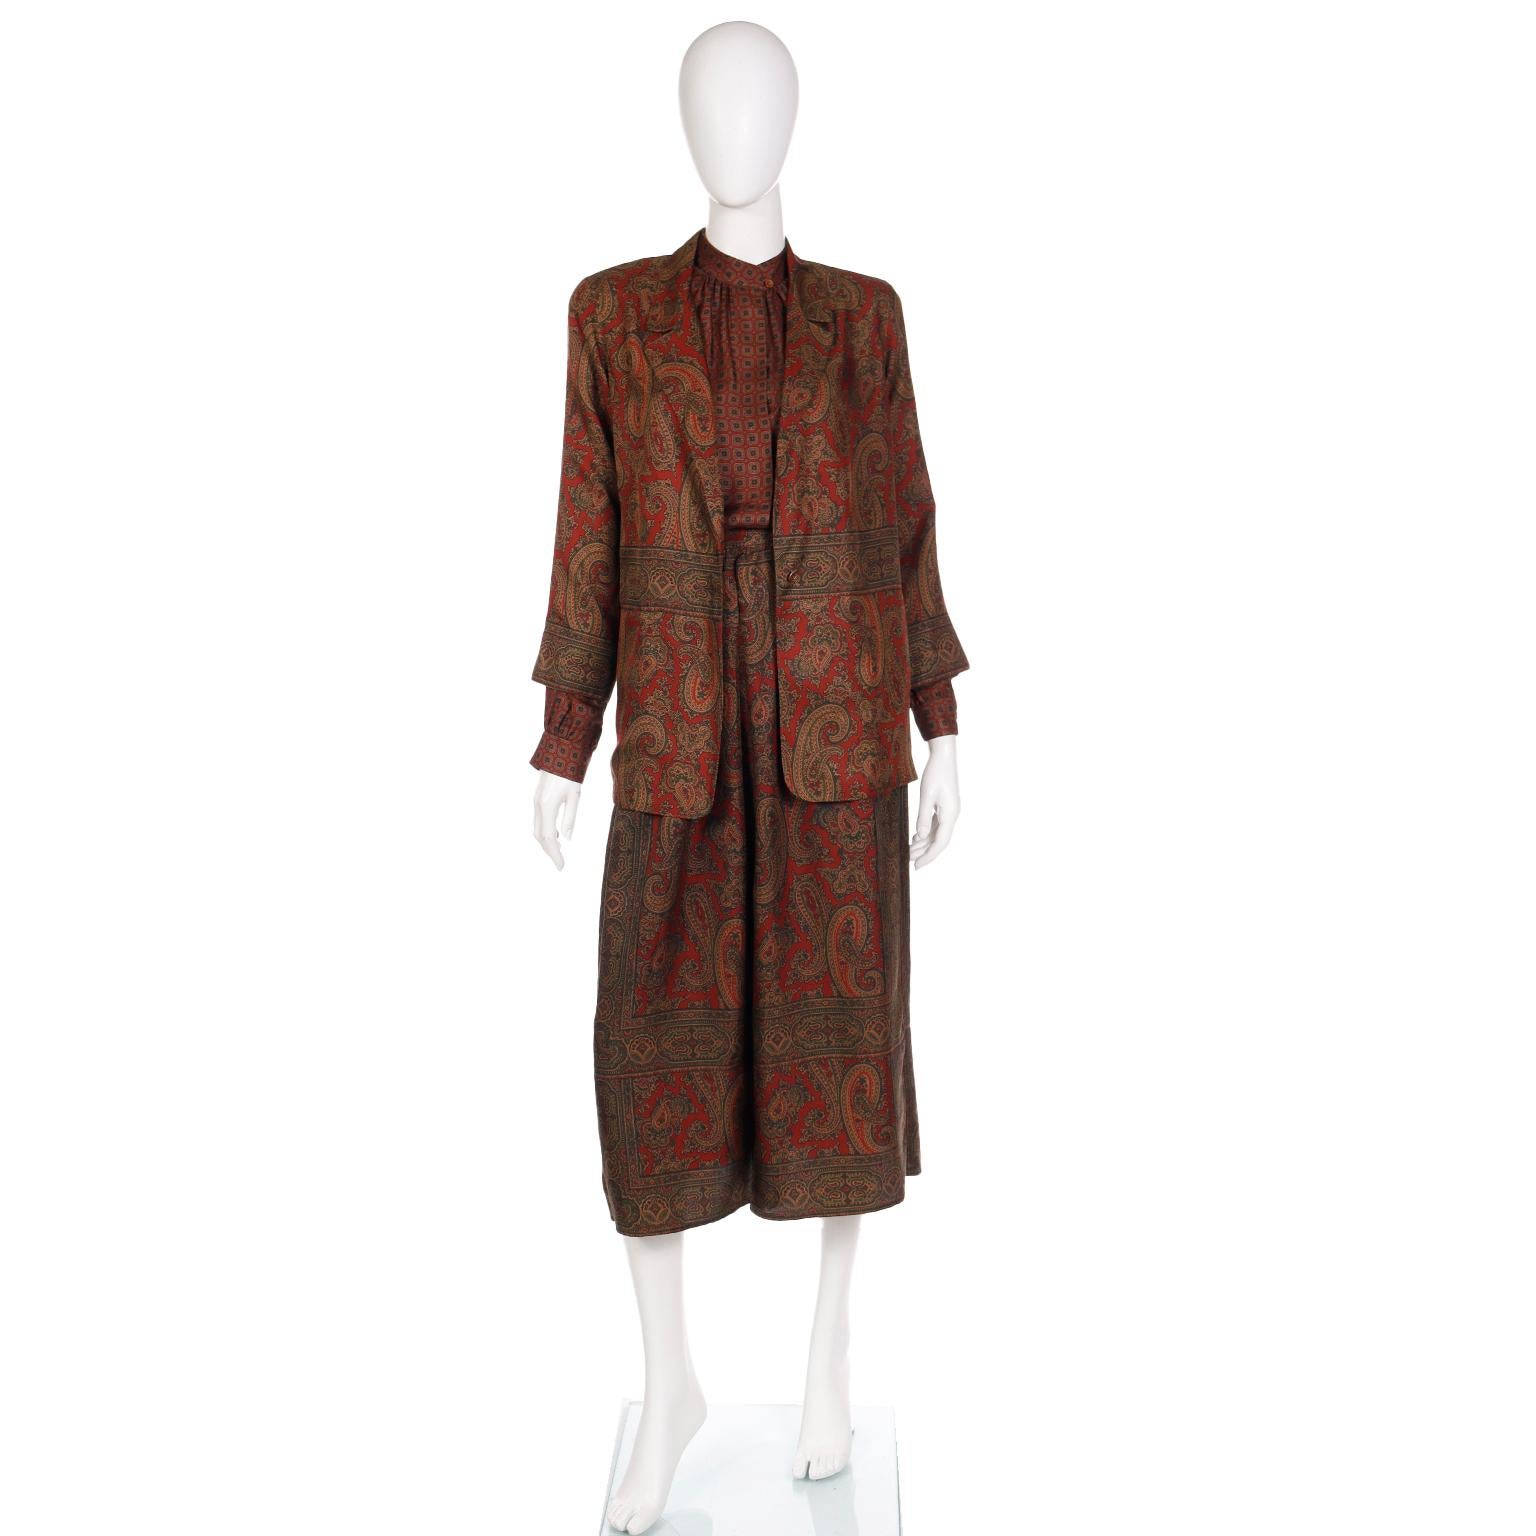 Anne Klein 1970s 3 Pc Blouse & Silk Jacket & Skirt Burgundy Paisley Print Outfit For Sale 1